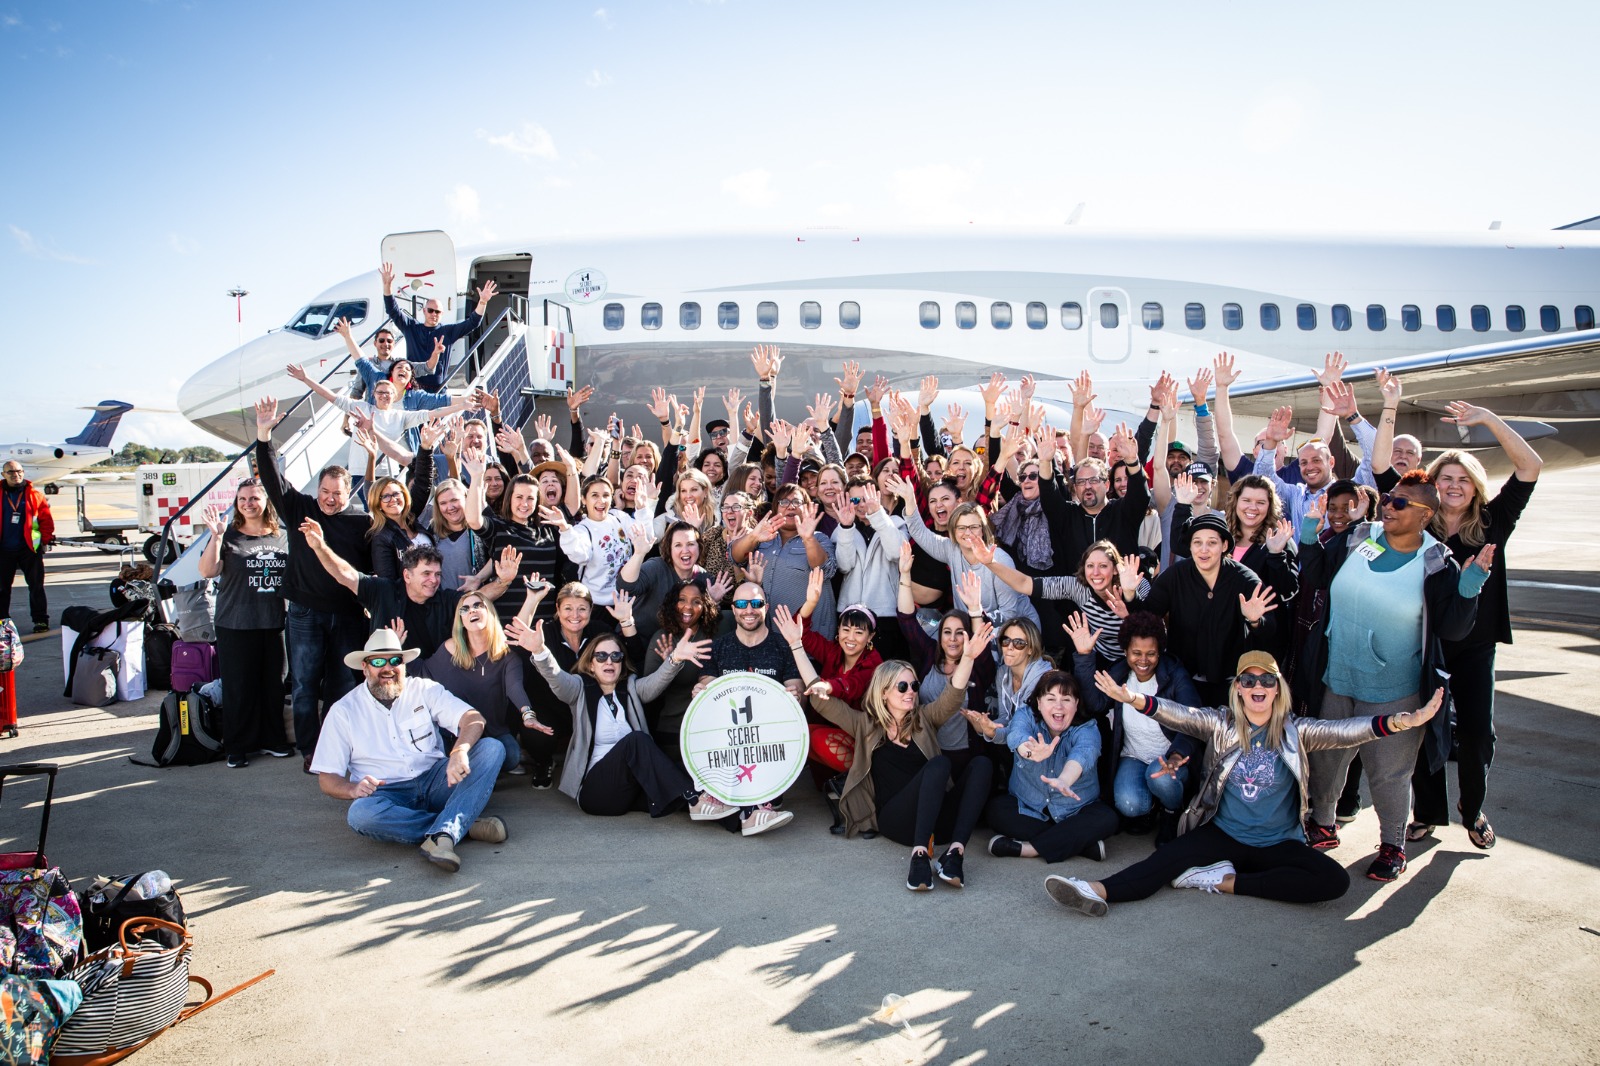 Group photo in front of private jet